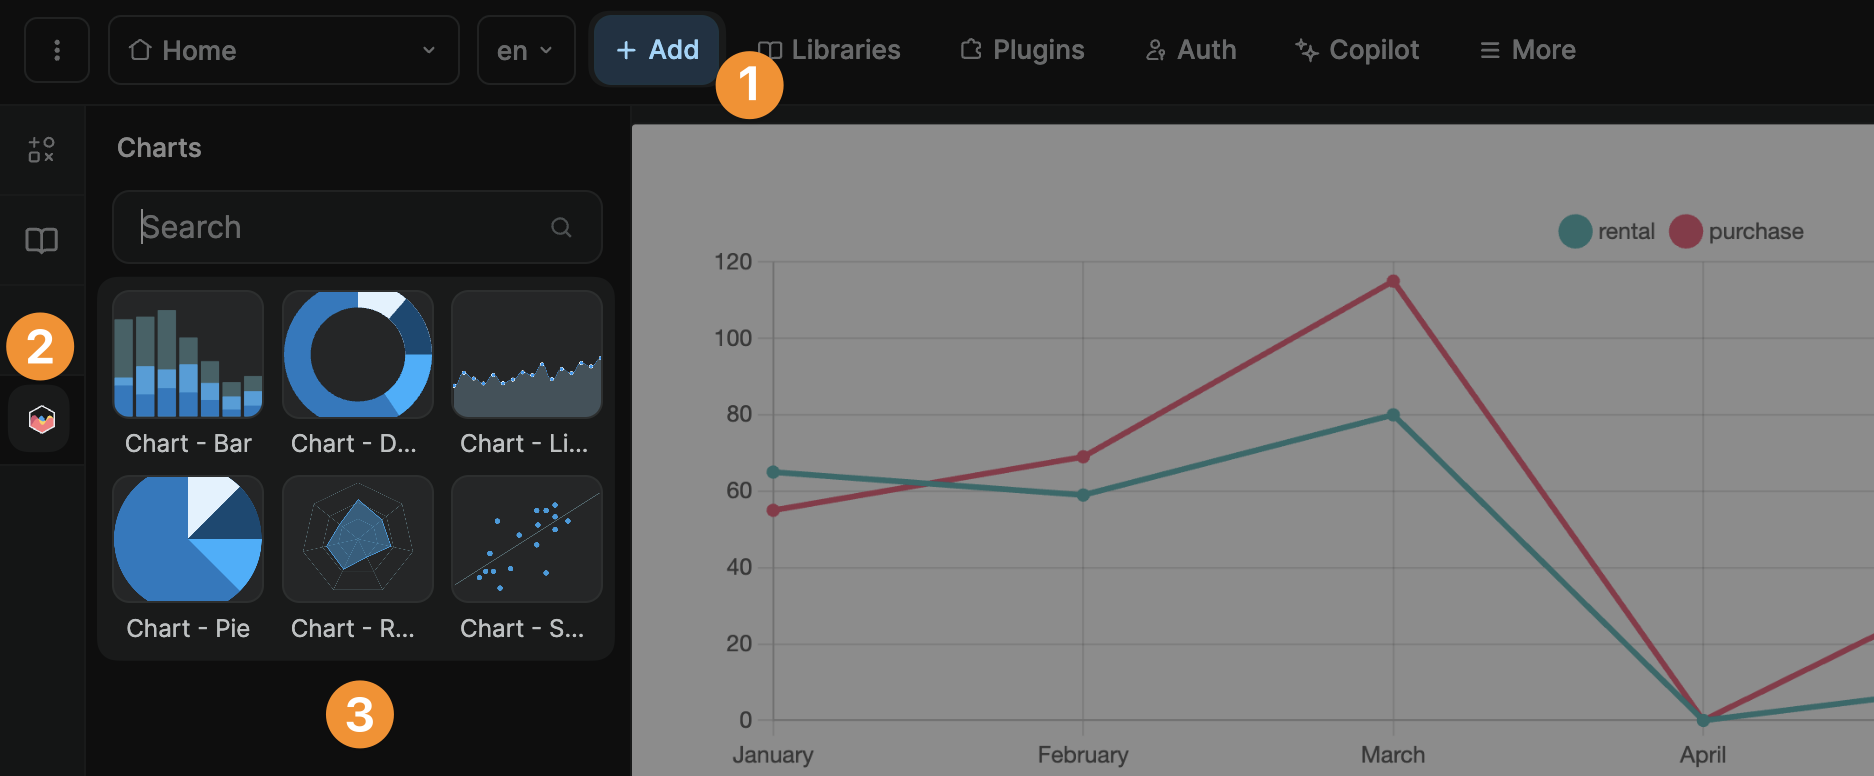 Adding chart elements in WeWeb